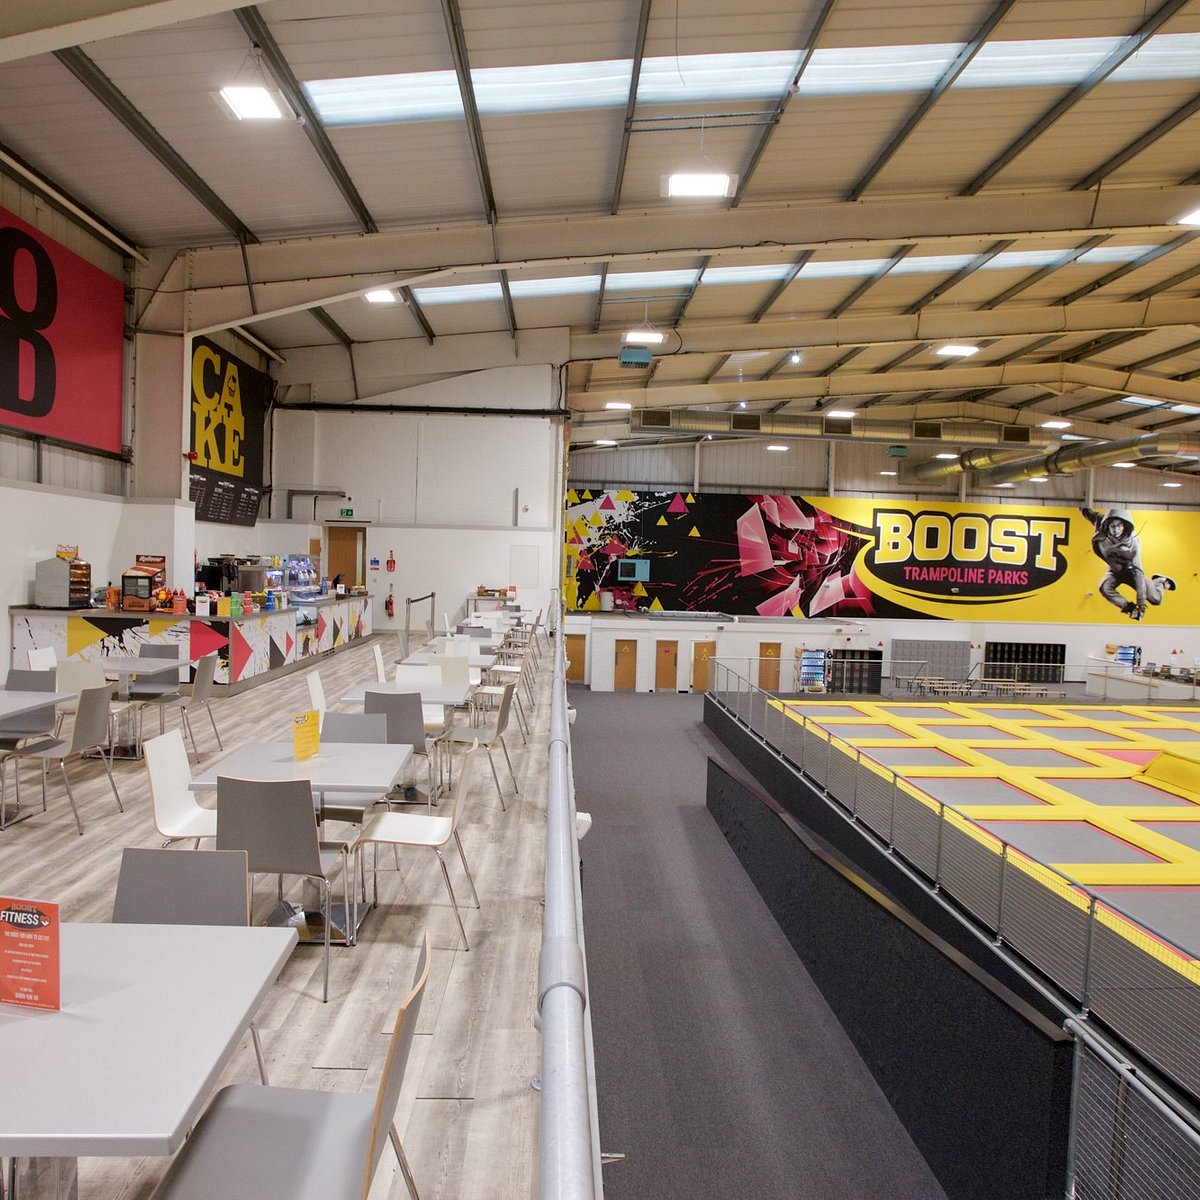 Boost Trampoline Parks (Northampton) - All Need to Know BEFORE You Go